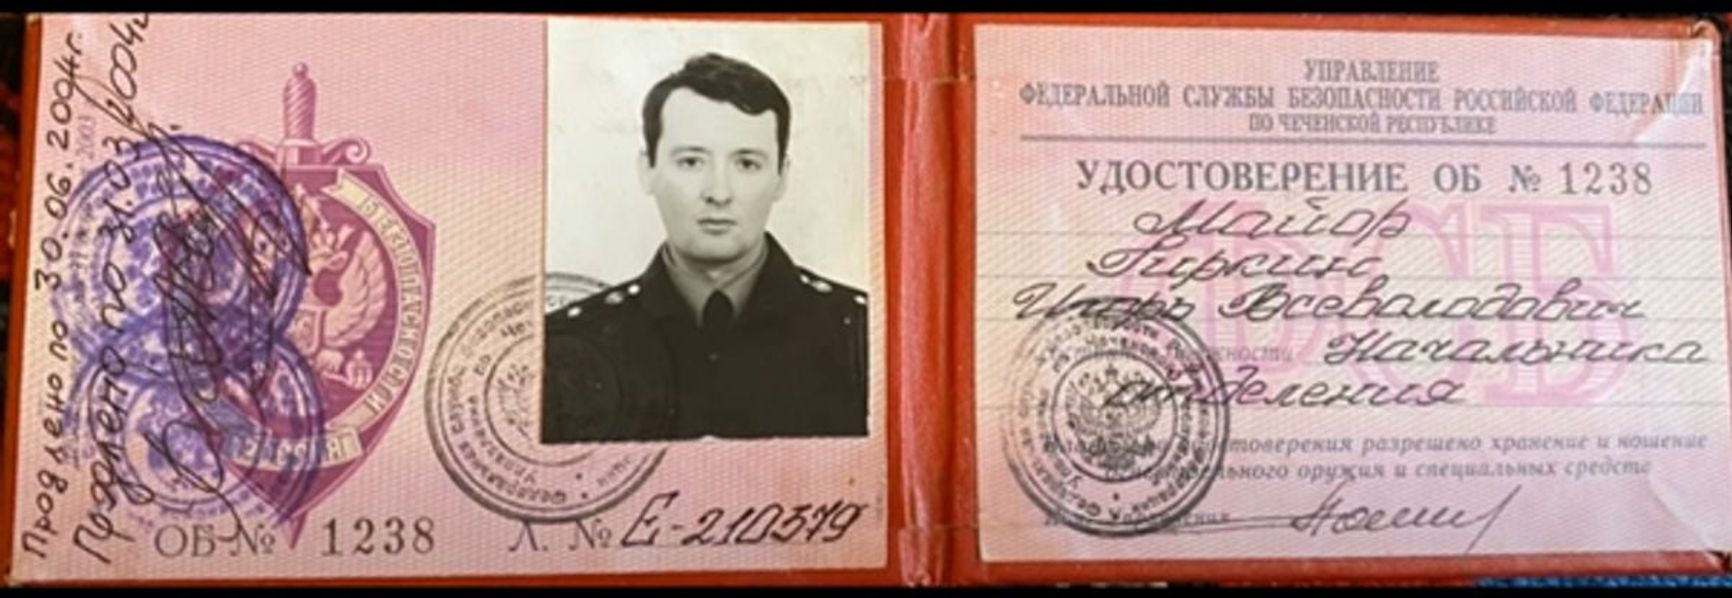 Photo of Girkin's ID card as the head of the FSB branch in the Chechen Republic   First published by his closest associate Mikhail Polynkov